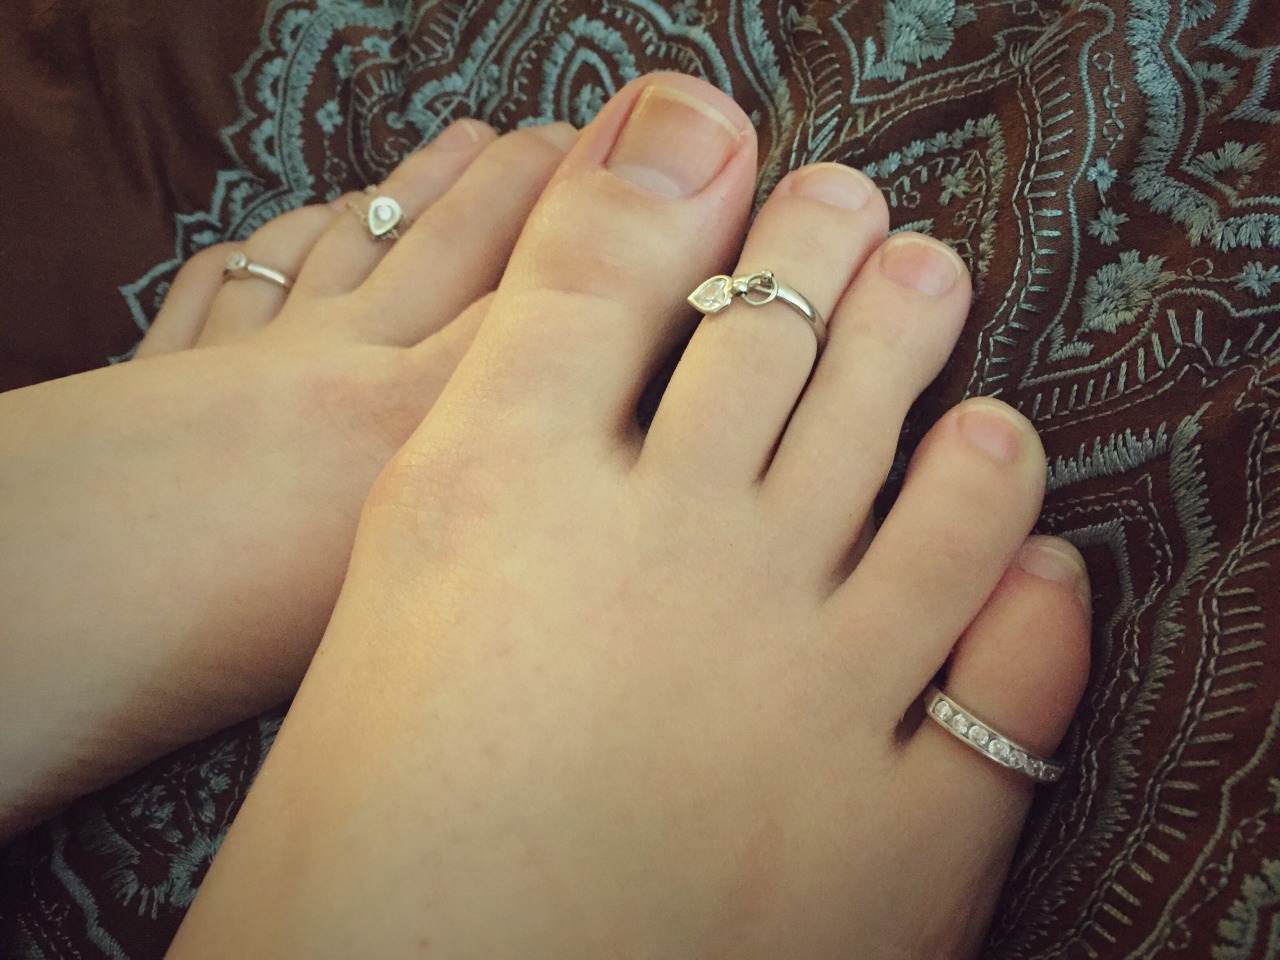 More For The Natural Lovers Feet